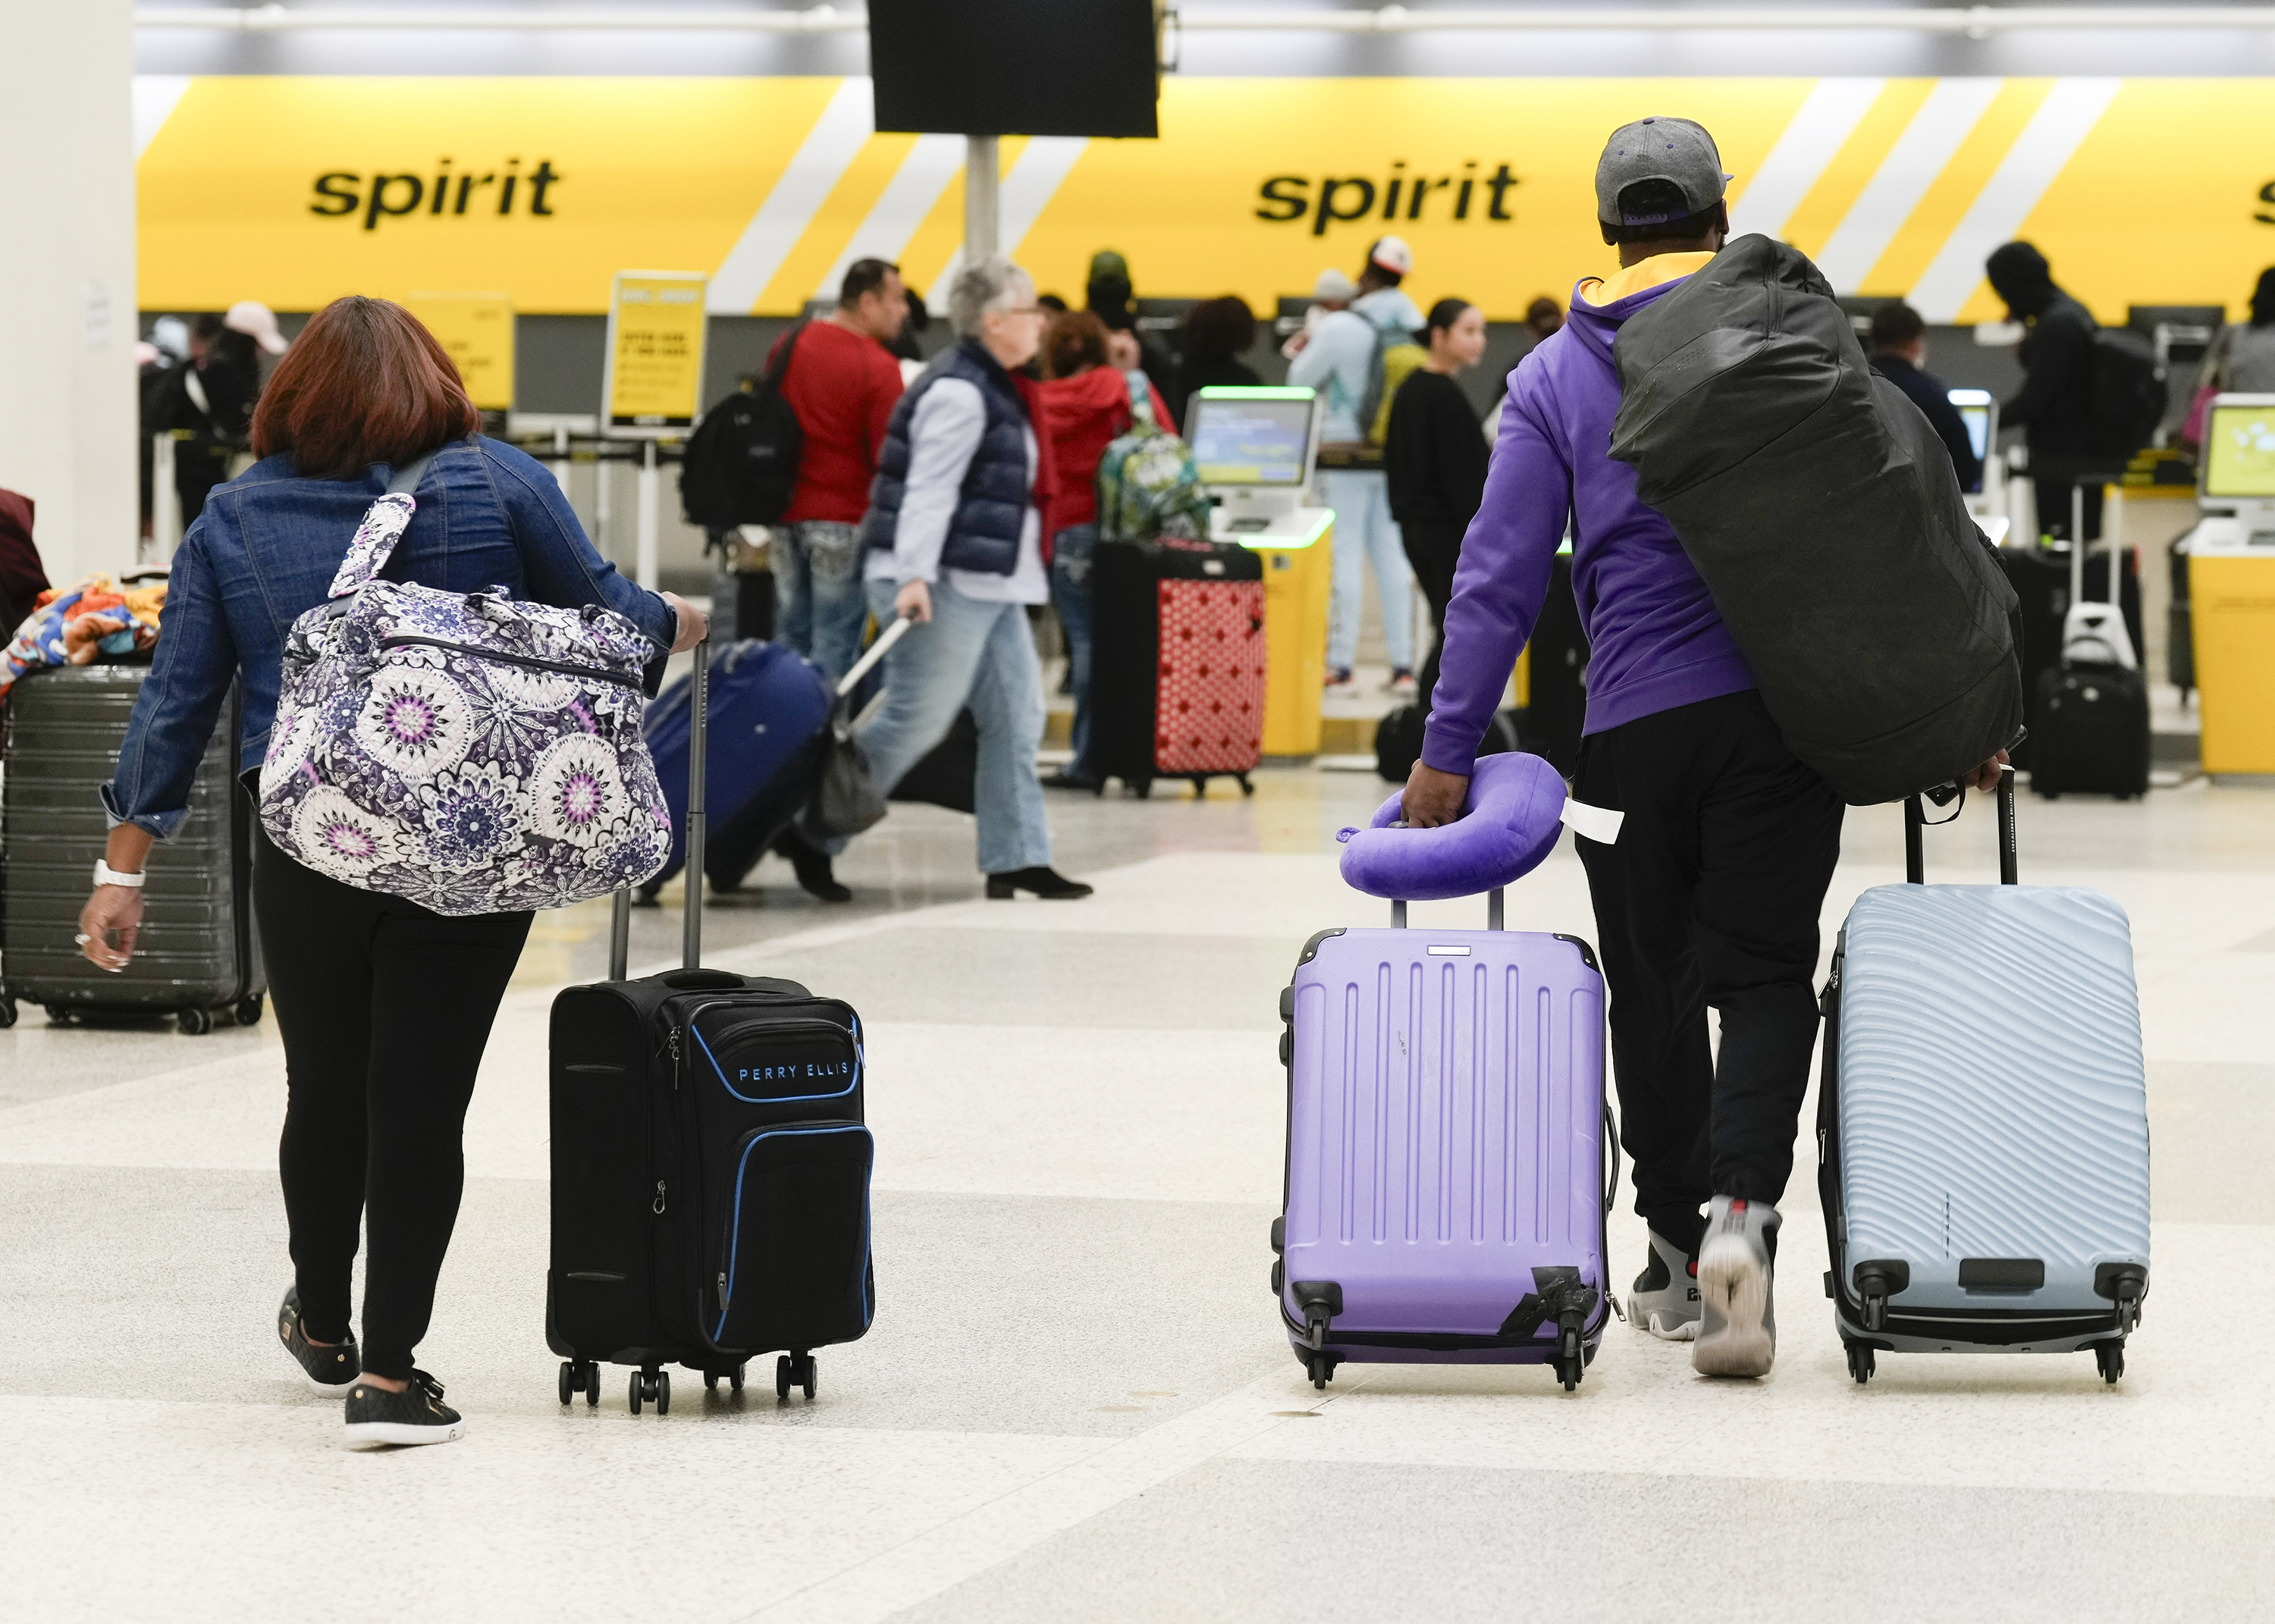 Travelers wheel luggage toward Spirit Airlines check-in desk at George Bush Intercontinental Airport, on November 21, in Houston.